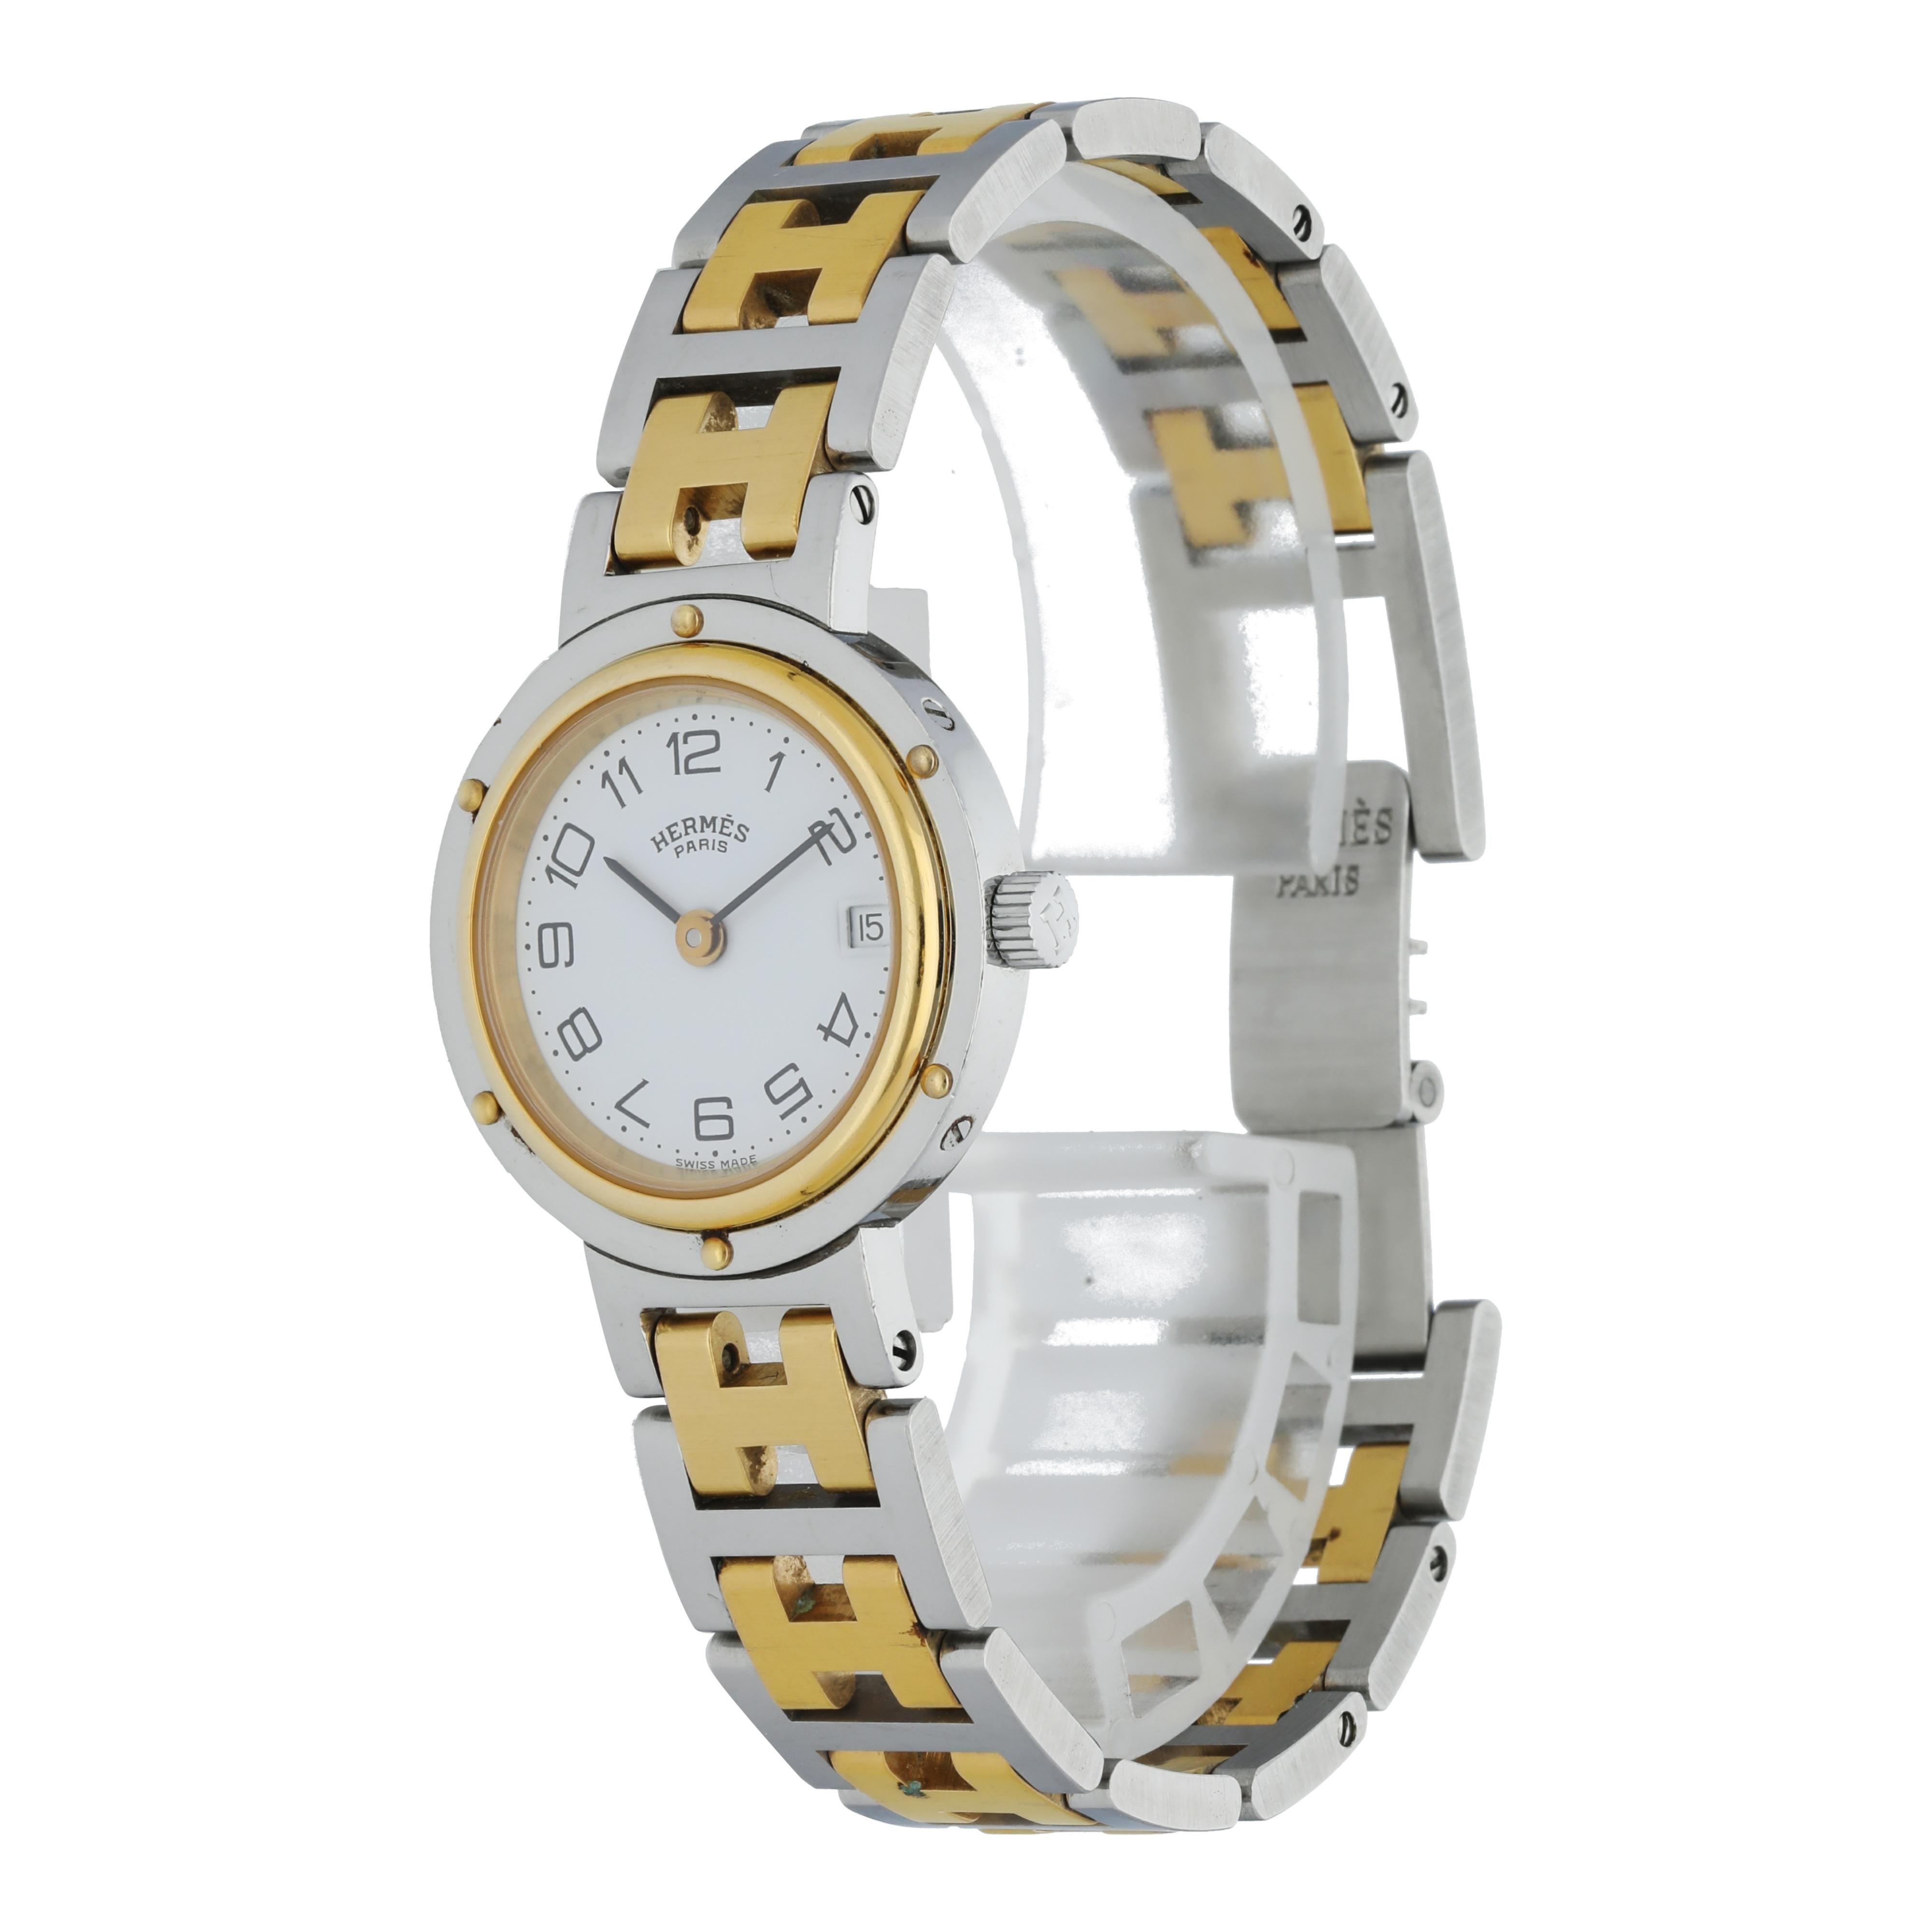 Hermes Clipper CL4.220 Ladies Watch.
24mm Stainless Steel case. 
Yellow Gold Stationary bezel. 
White dial with hands and Arabic numeral hour markers. 
Minute markers on the outer dial. 
Date display at the 3 o'clock position. 
Stainless Steel